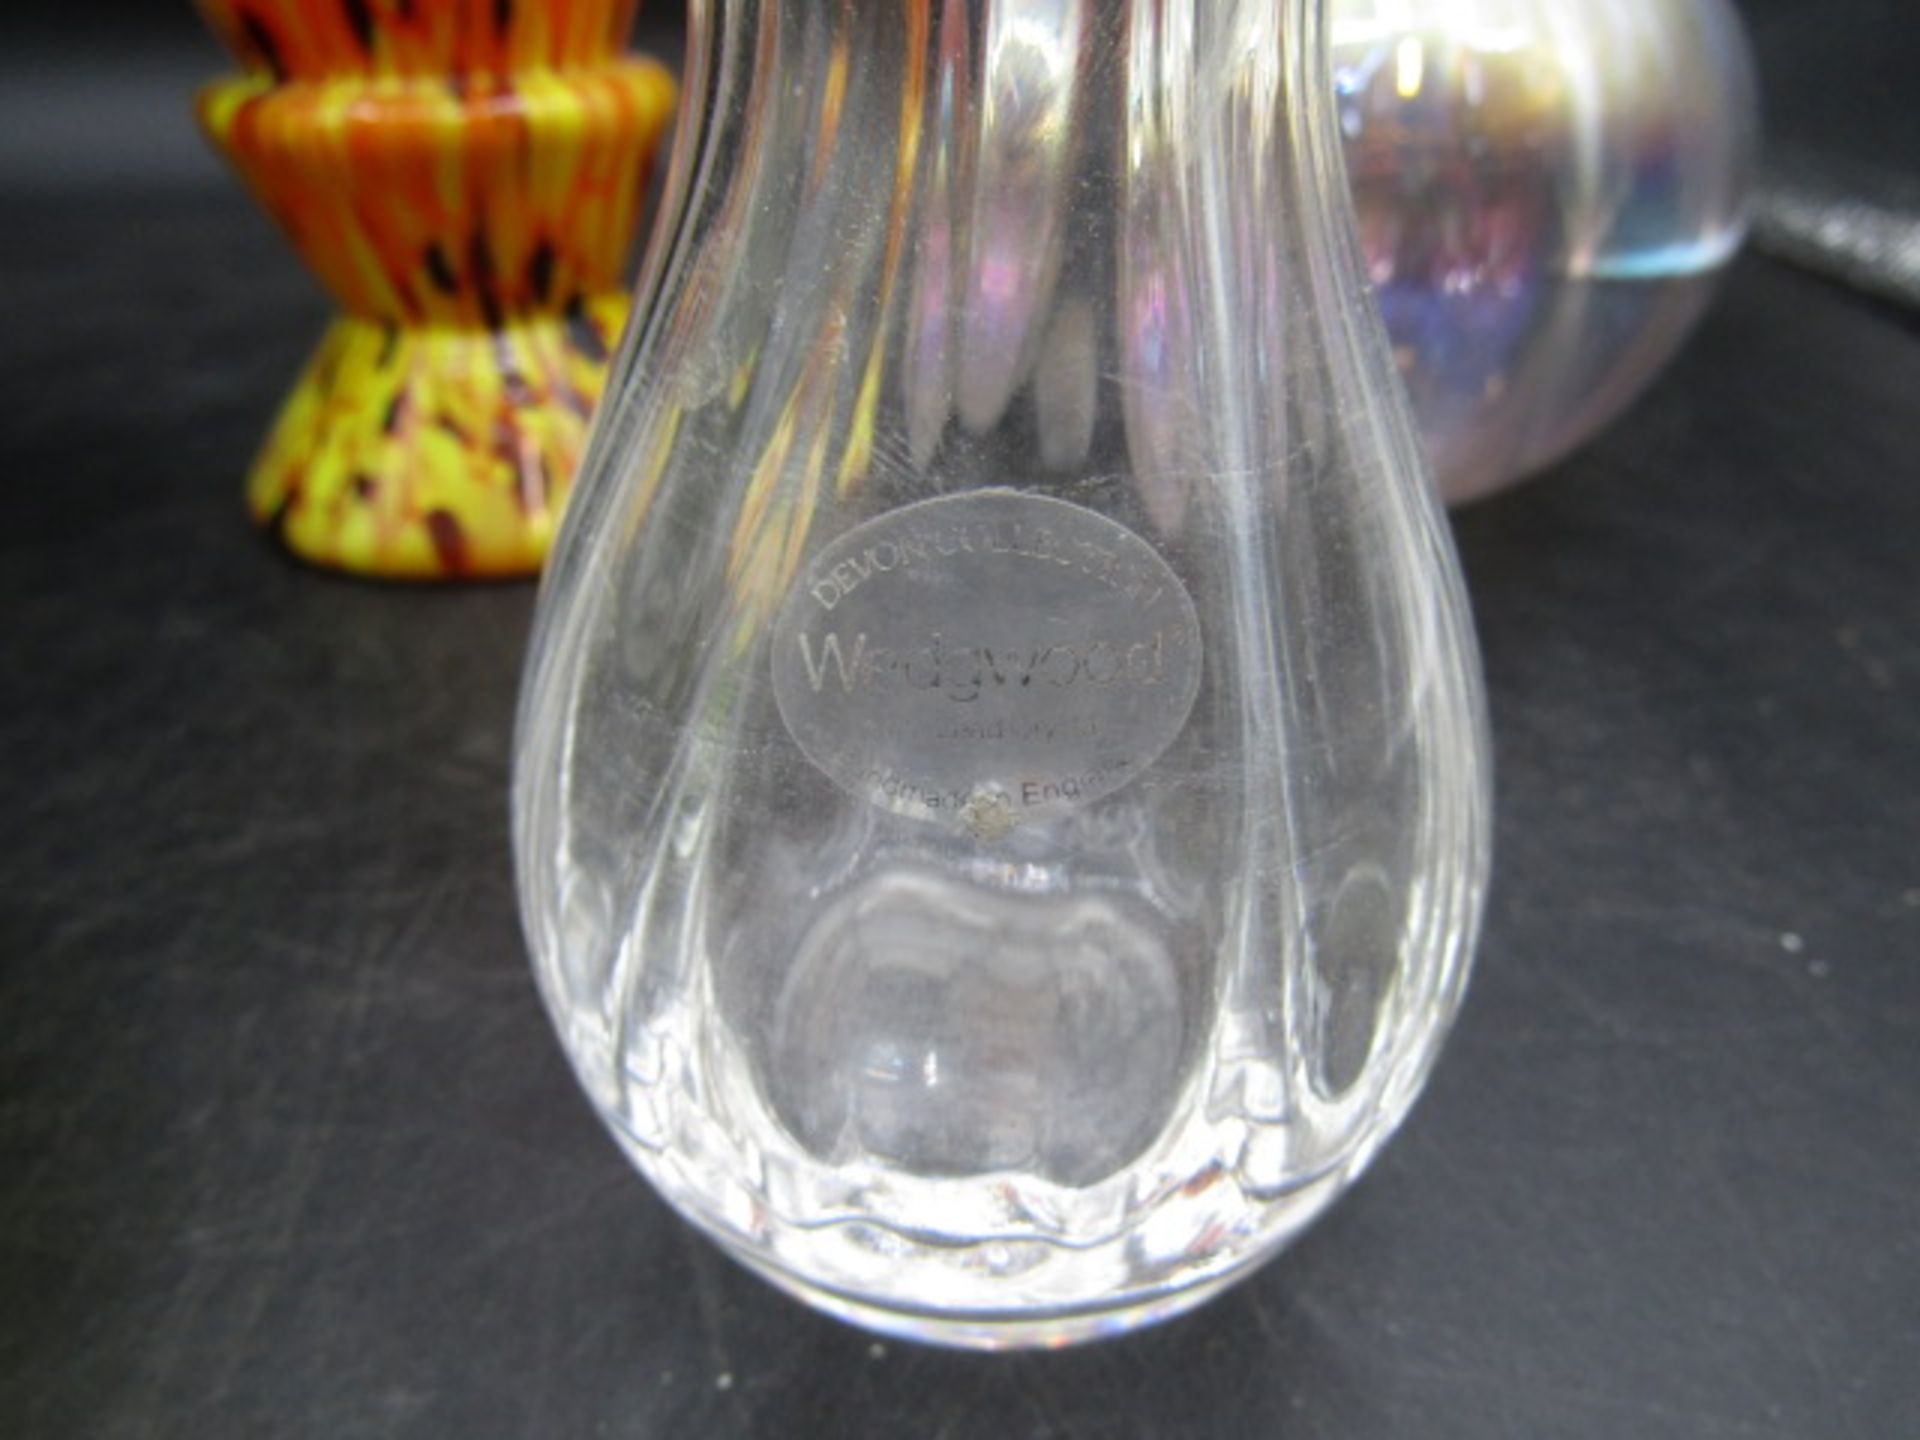 Art glass vases inc iridescent hand blown vase and a Wedgwood vase Orange vase has nibbles around - Image 8 of 9